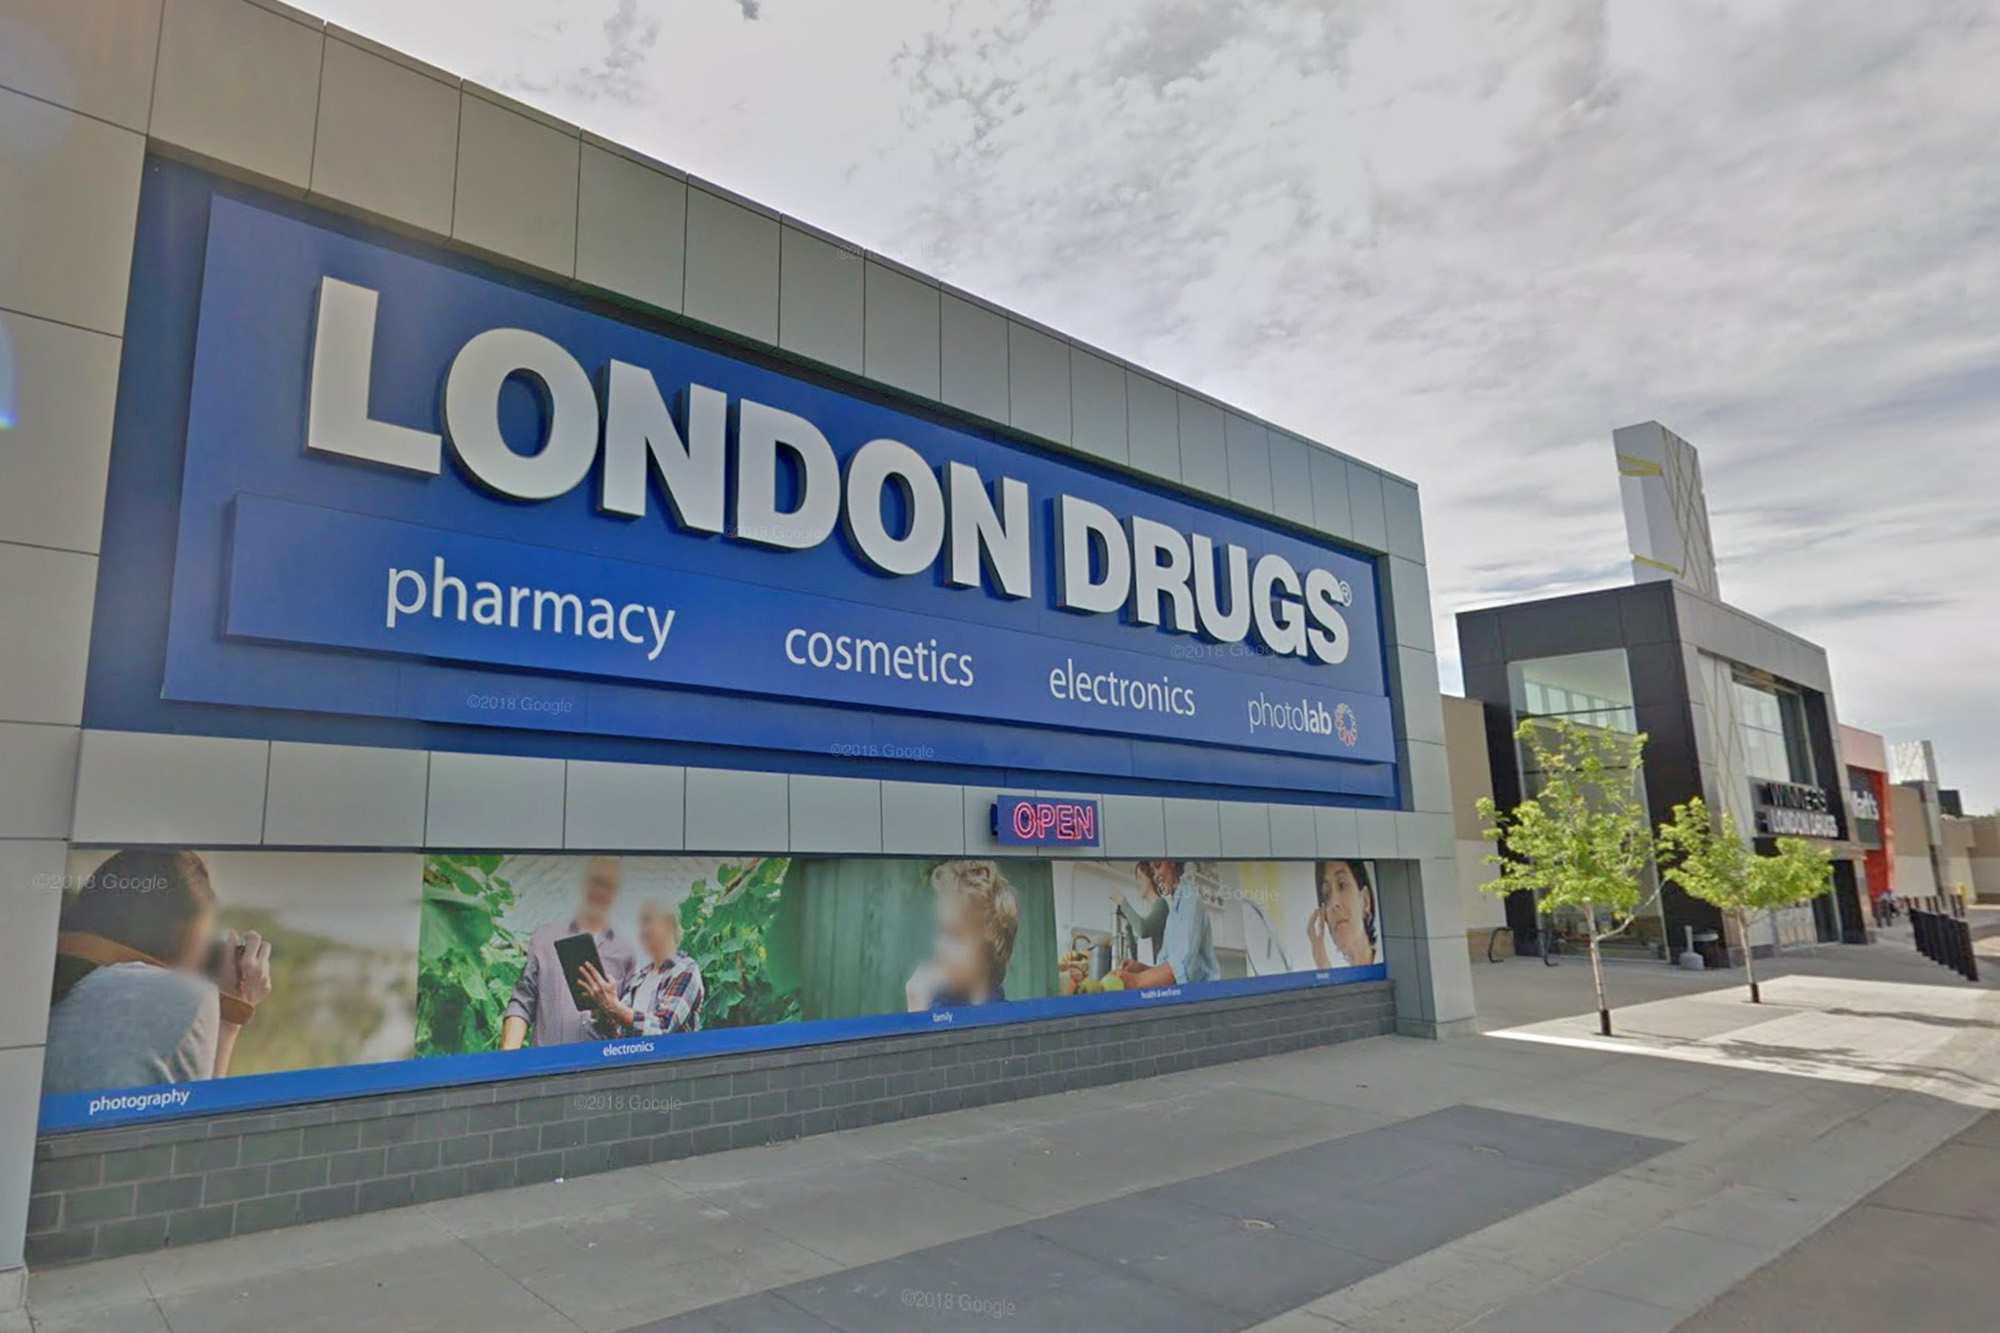 London Drugs is helping local businesses hit hard by COVID-19